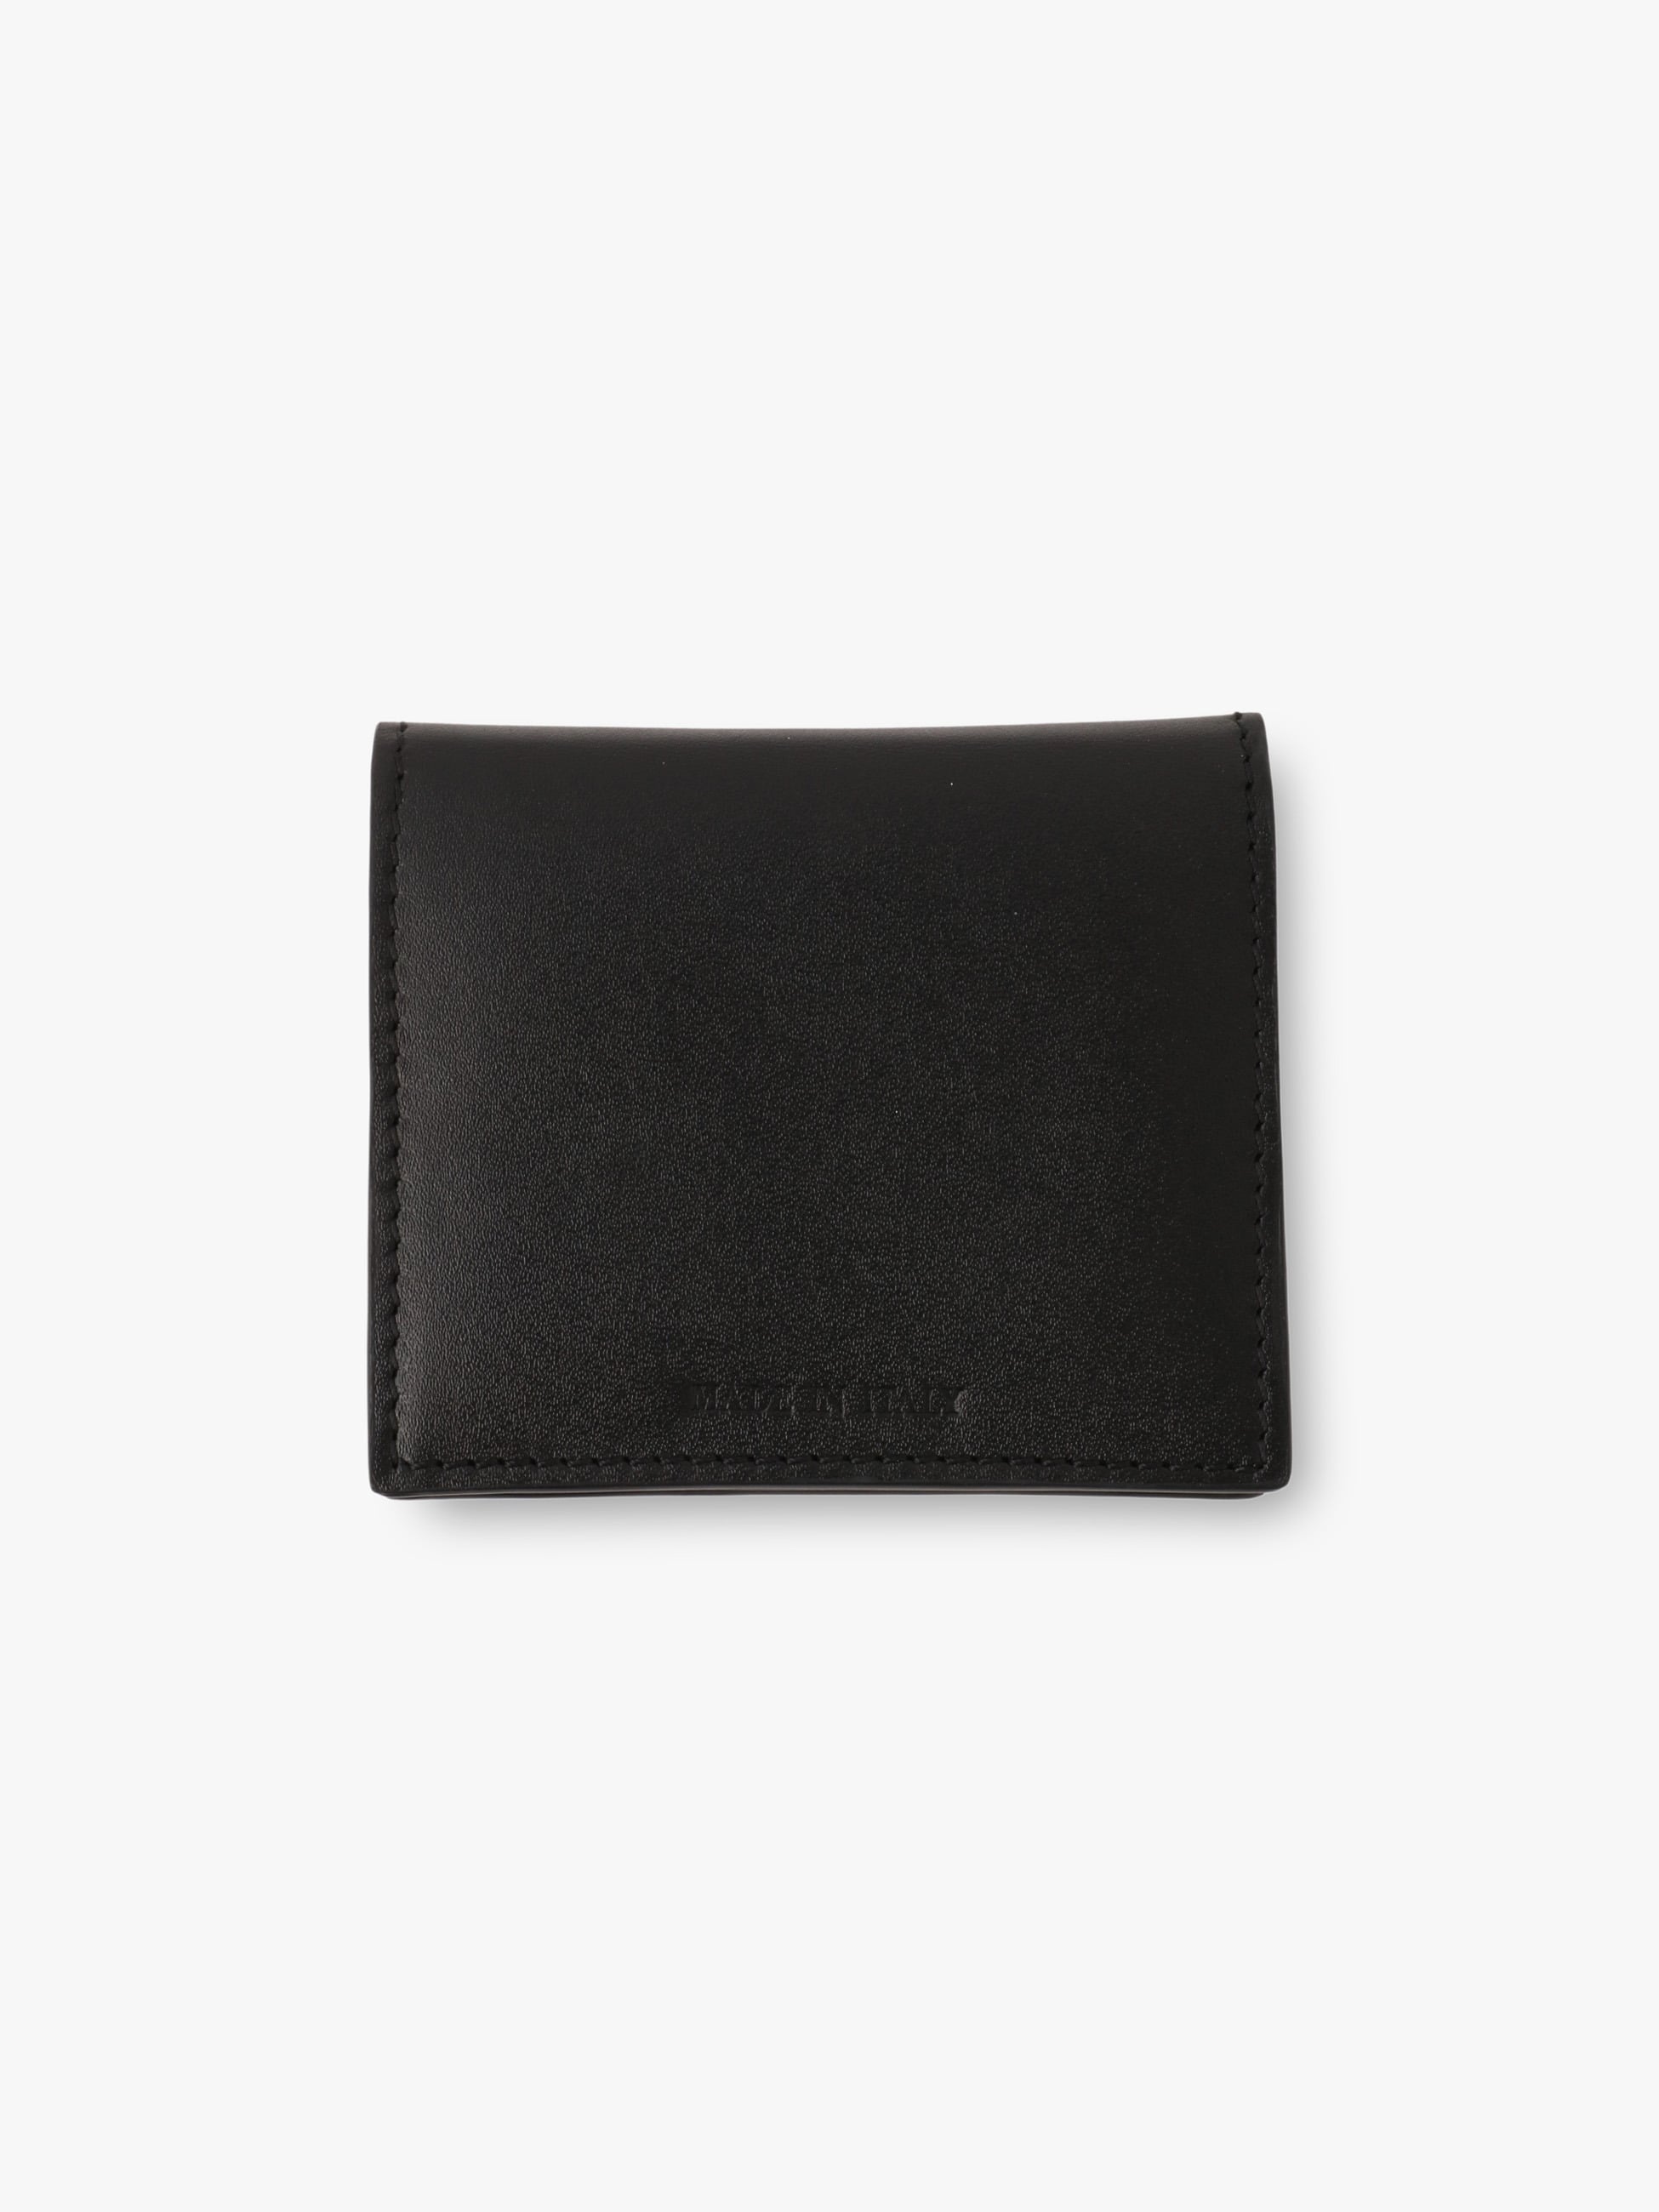 Leather Coin Case 詳細画像 black 1